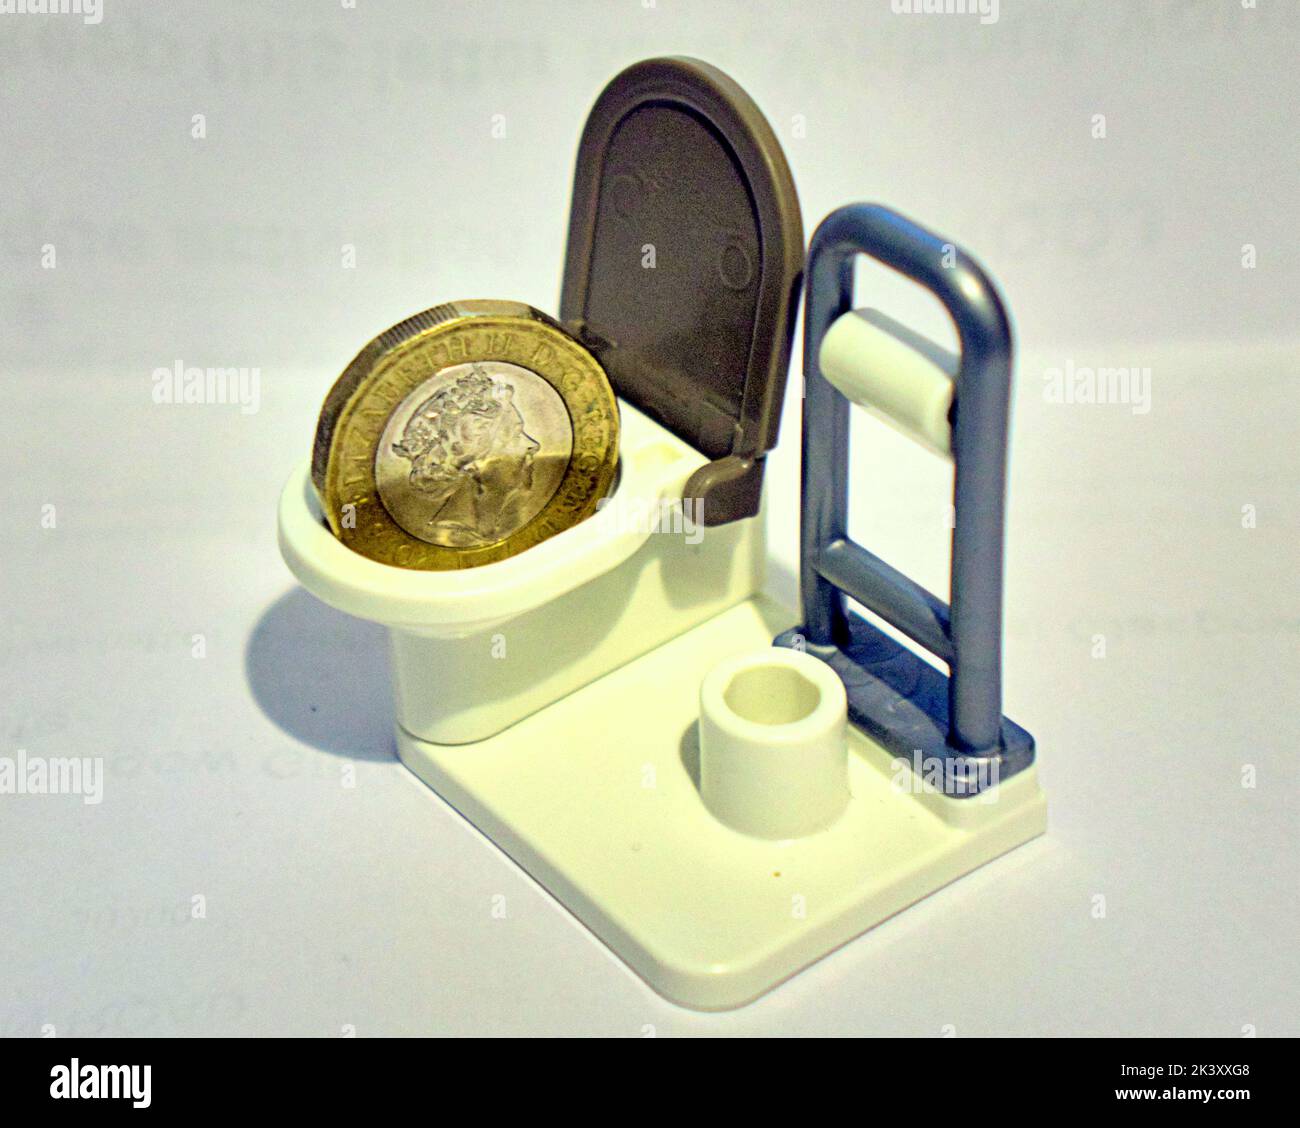 Glasgow, Scotland, UK 29th September, 2022. Concept of current news item Pound goes down toilet as it heads to parity with the dollar. Credit Gerard Ferry/Alamy Live News Stock Photo